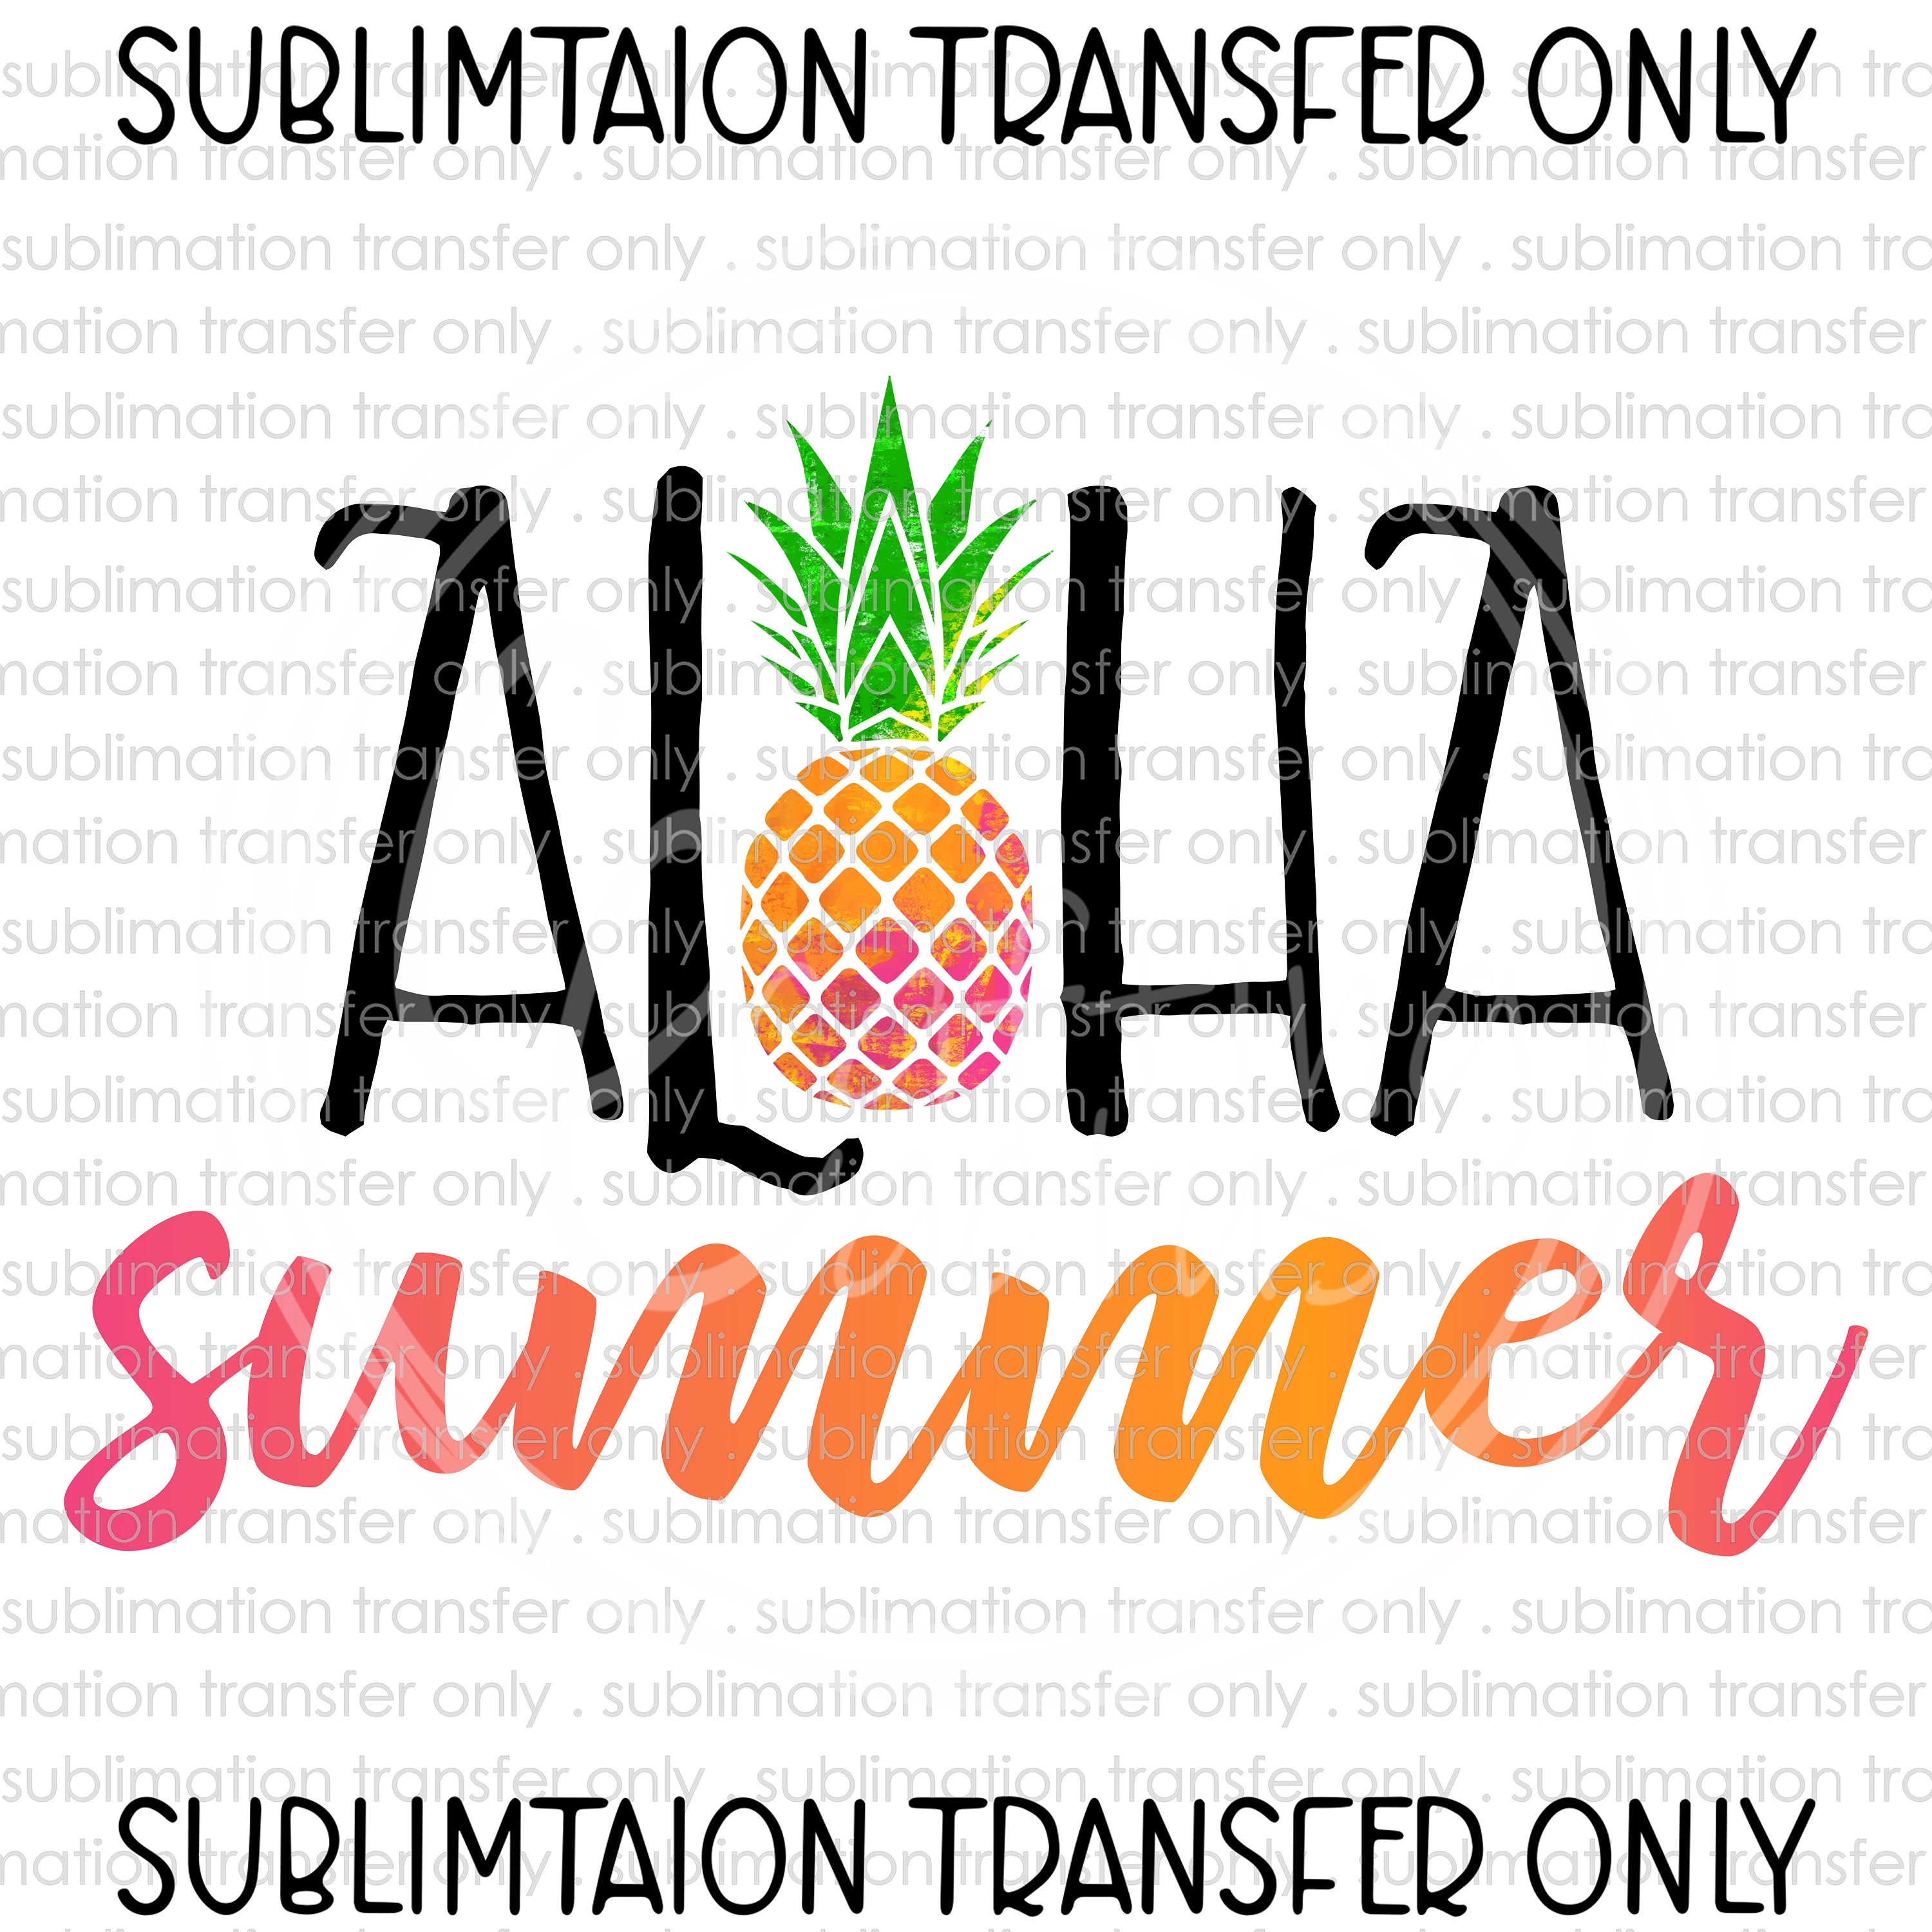 Heat Transfer Ready to Press Cute Pineapple Sublimation Transfer Summer State of Mind Summer Pineapple Summertime Sublimation Print